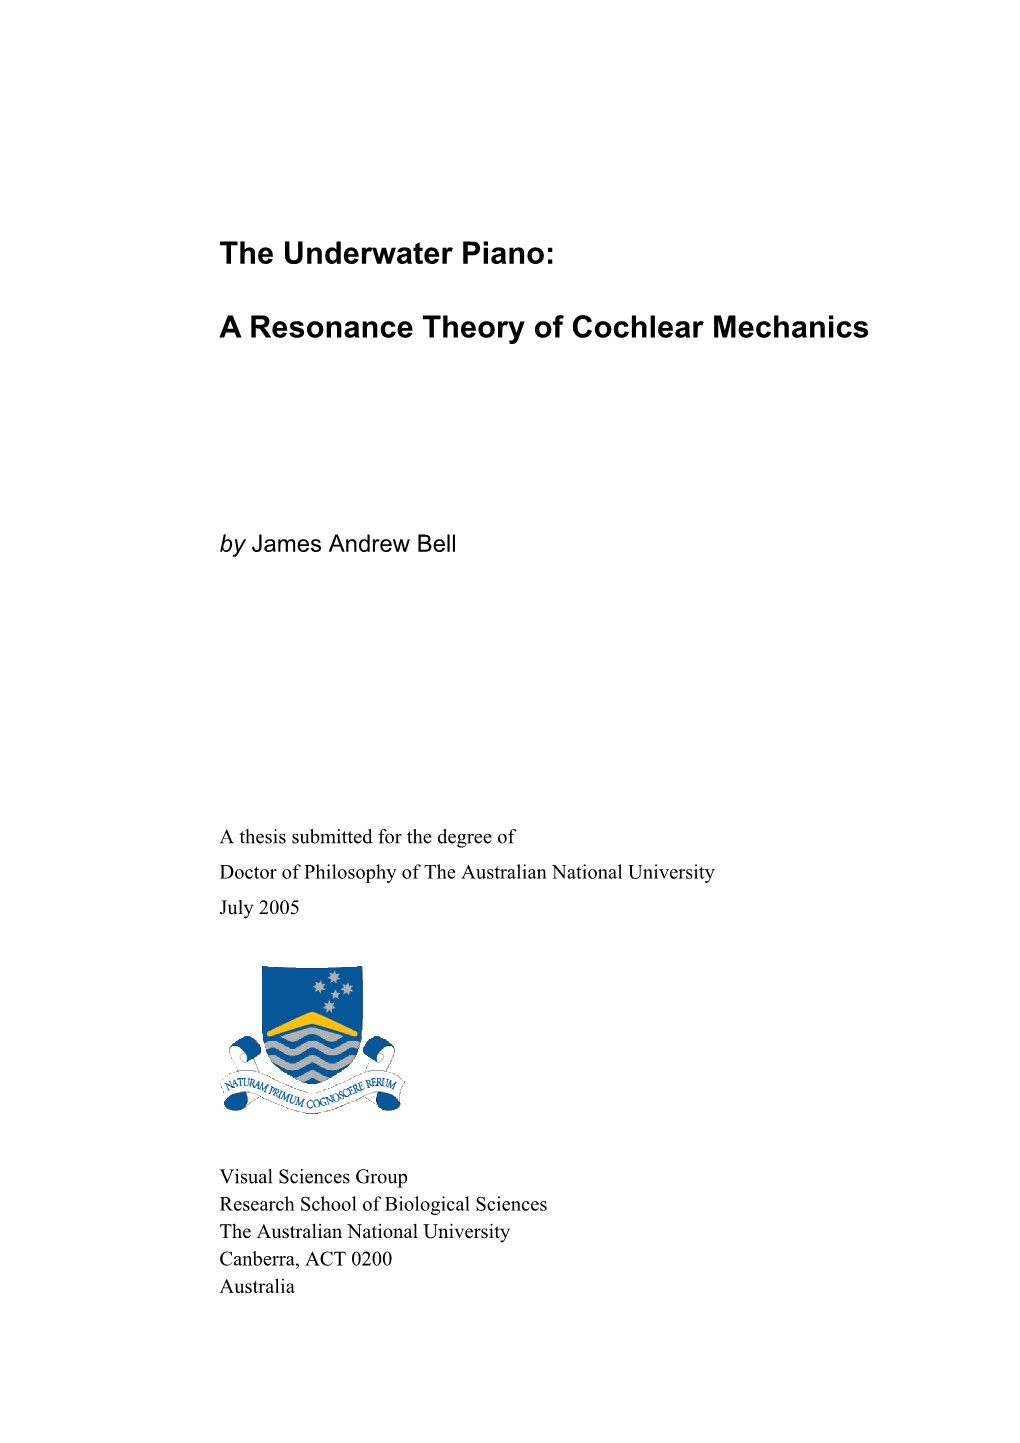 The Underwater Piano: a Resonance Theory of Cochlear Mechanics